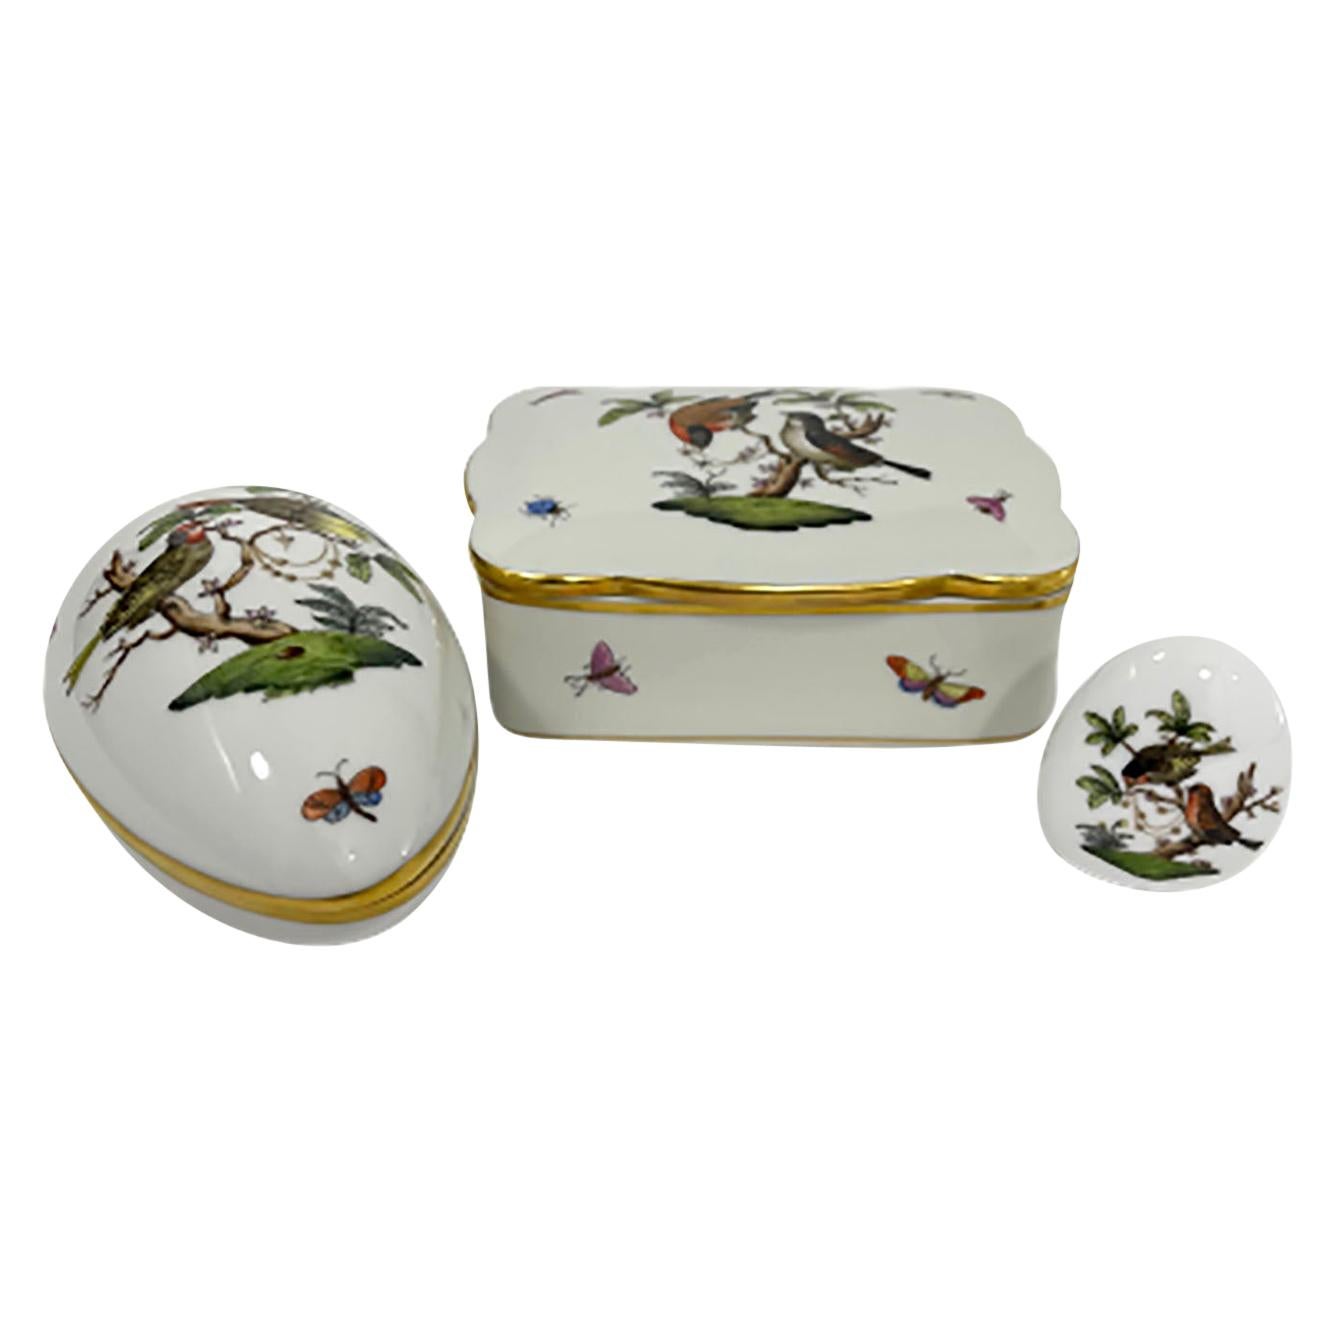 Herend Hungary Porcelain "Rothschild" Boxes For Sale